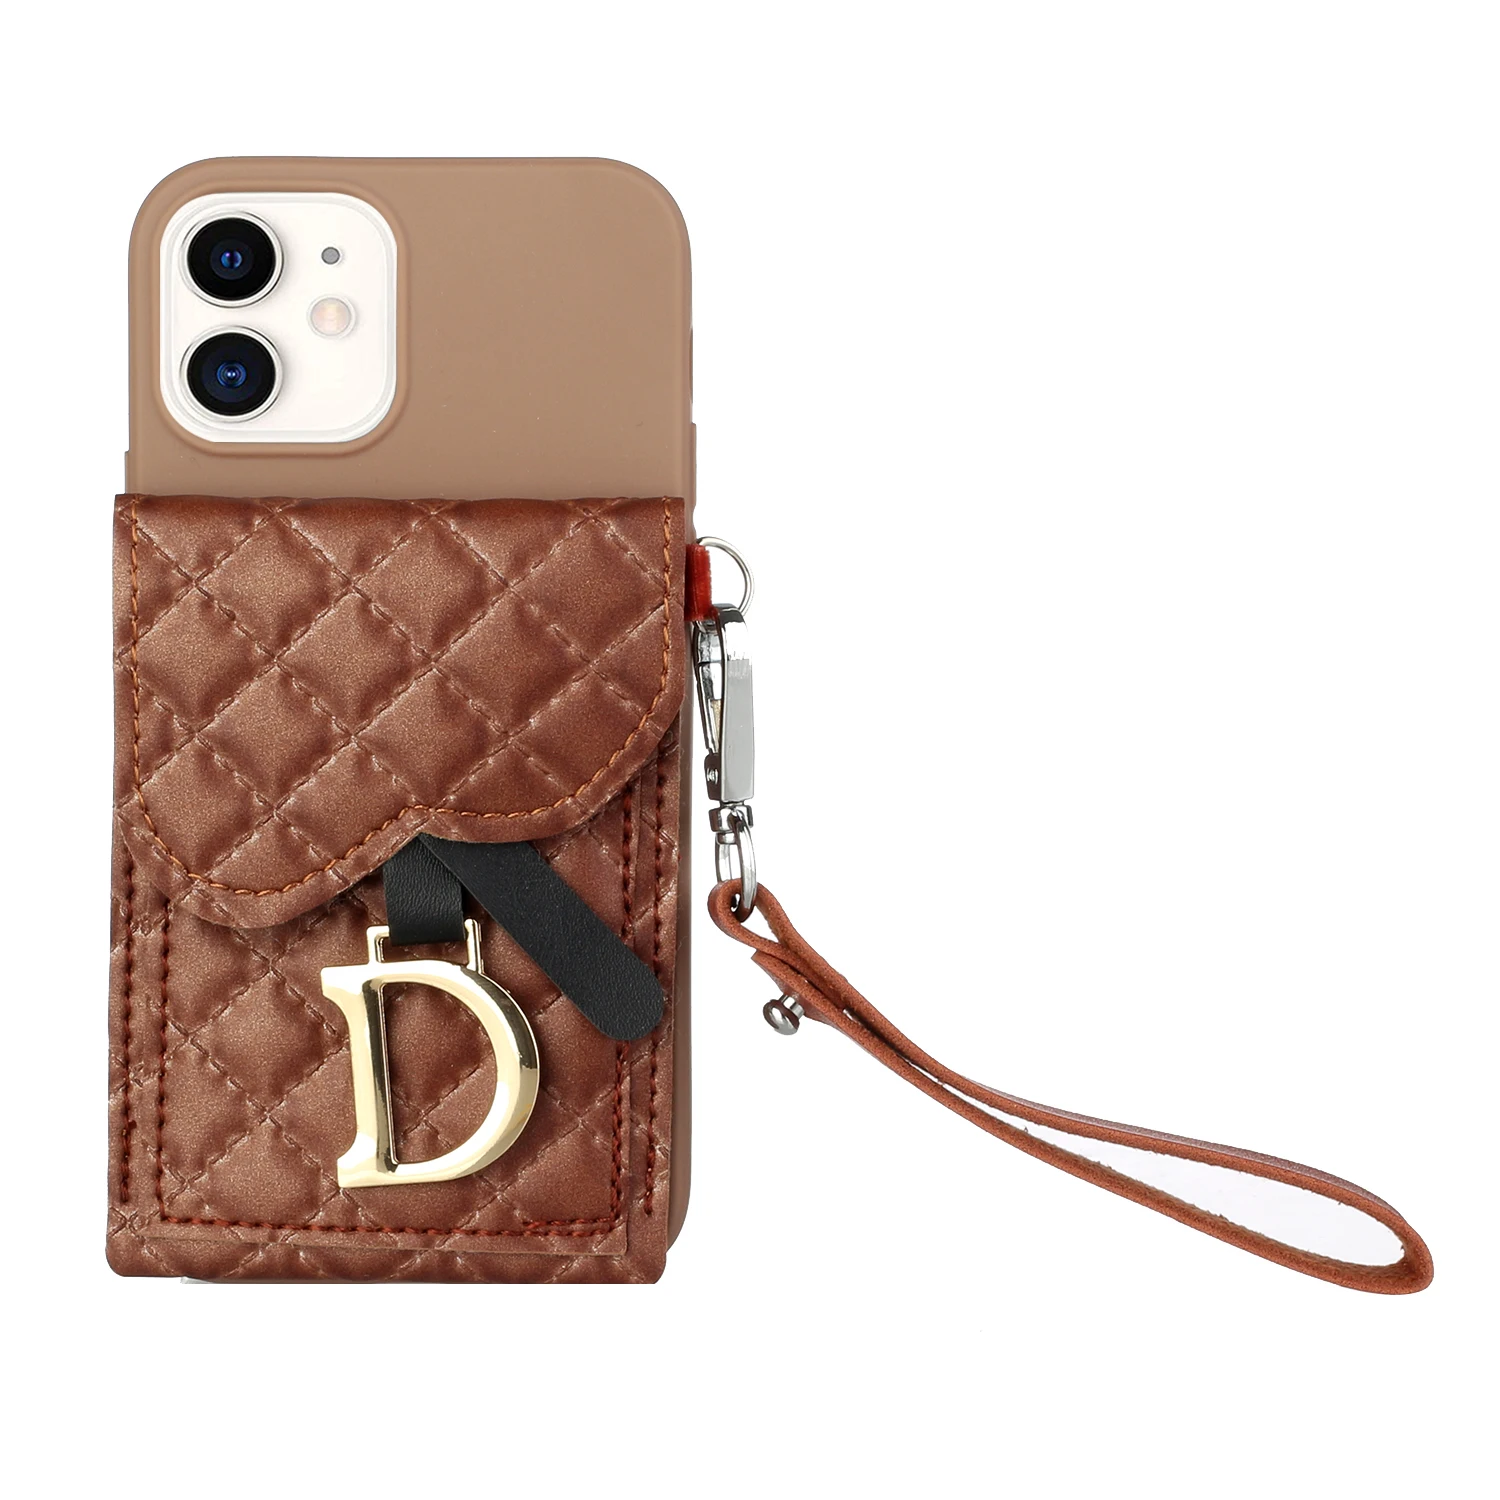 

Soft Pu leather Card bag soft tpu mobile Phone Case For Iphone 12 mini 12 max New Card Slot Wallet Capa Coque cases